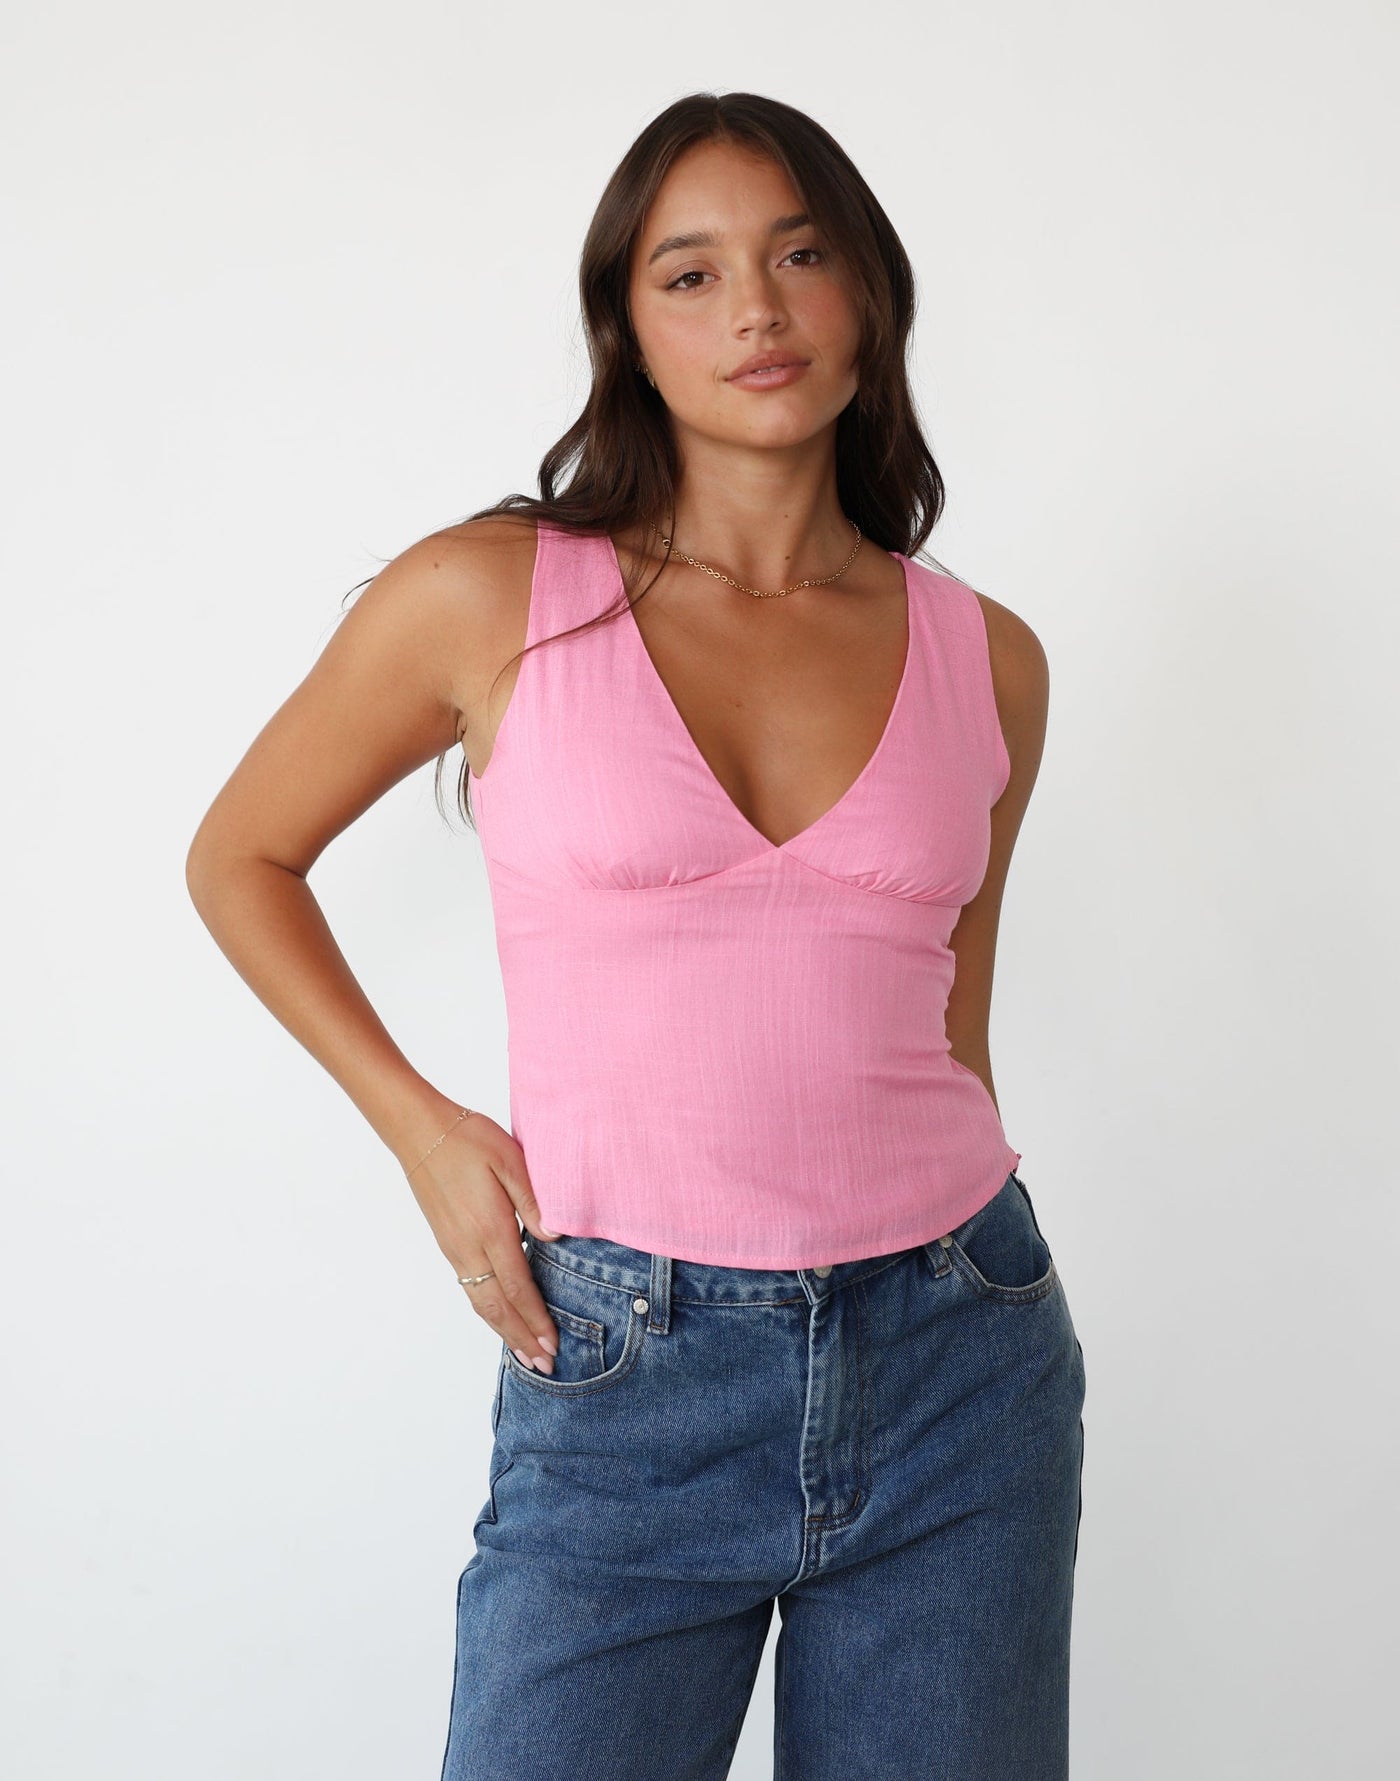 Amor Top (Pink) | Charcoal Exclusive - Linen Blend Top - Women's Top - Charcoal Clothing